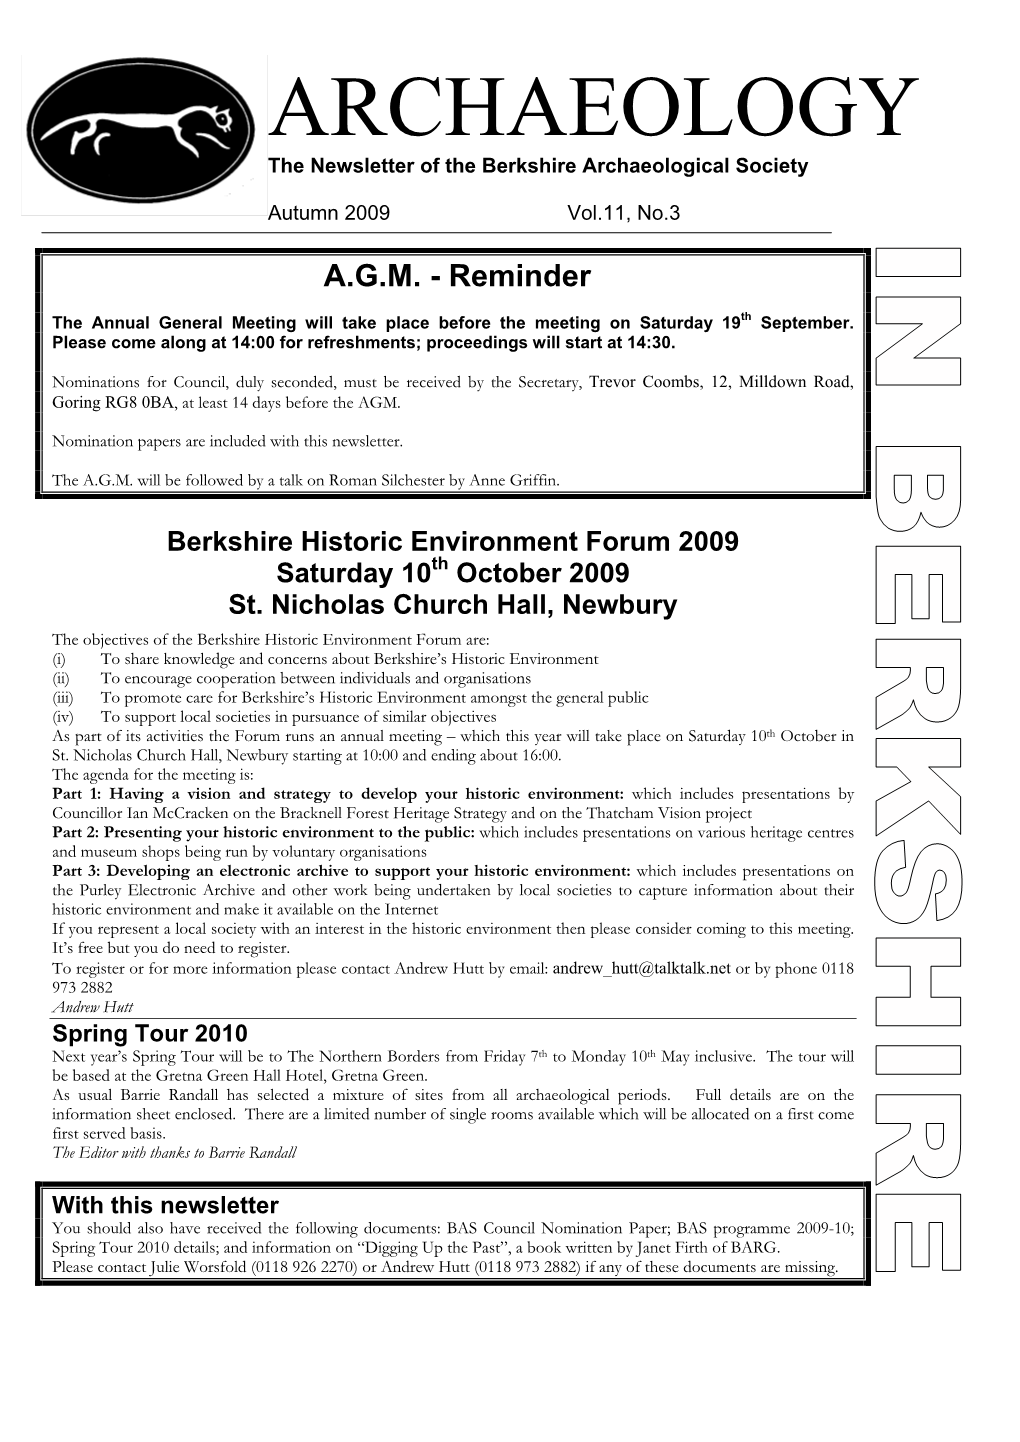 ARCHAEOLOGY the Newsletter of the Berkshire Archaeological Society